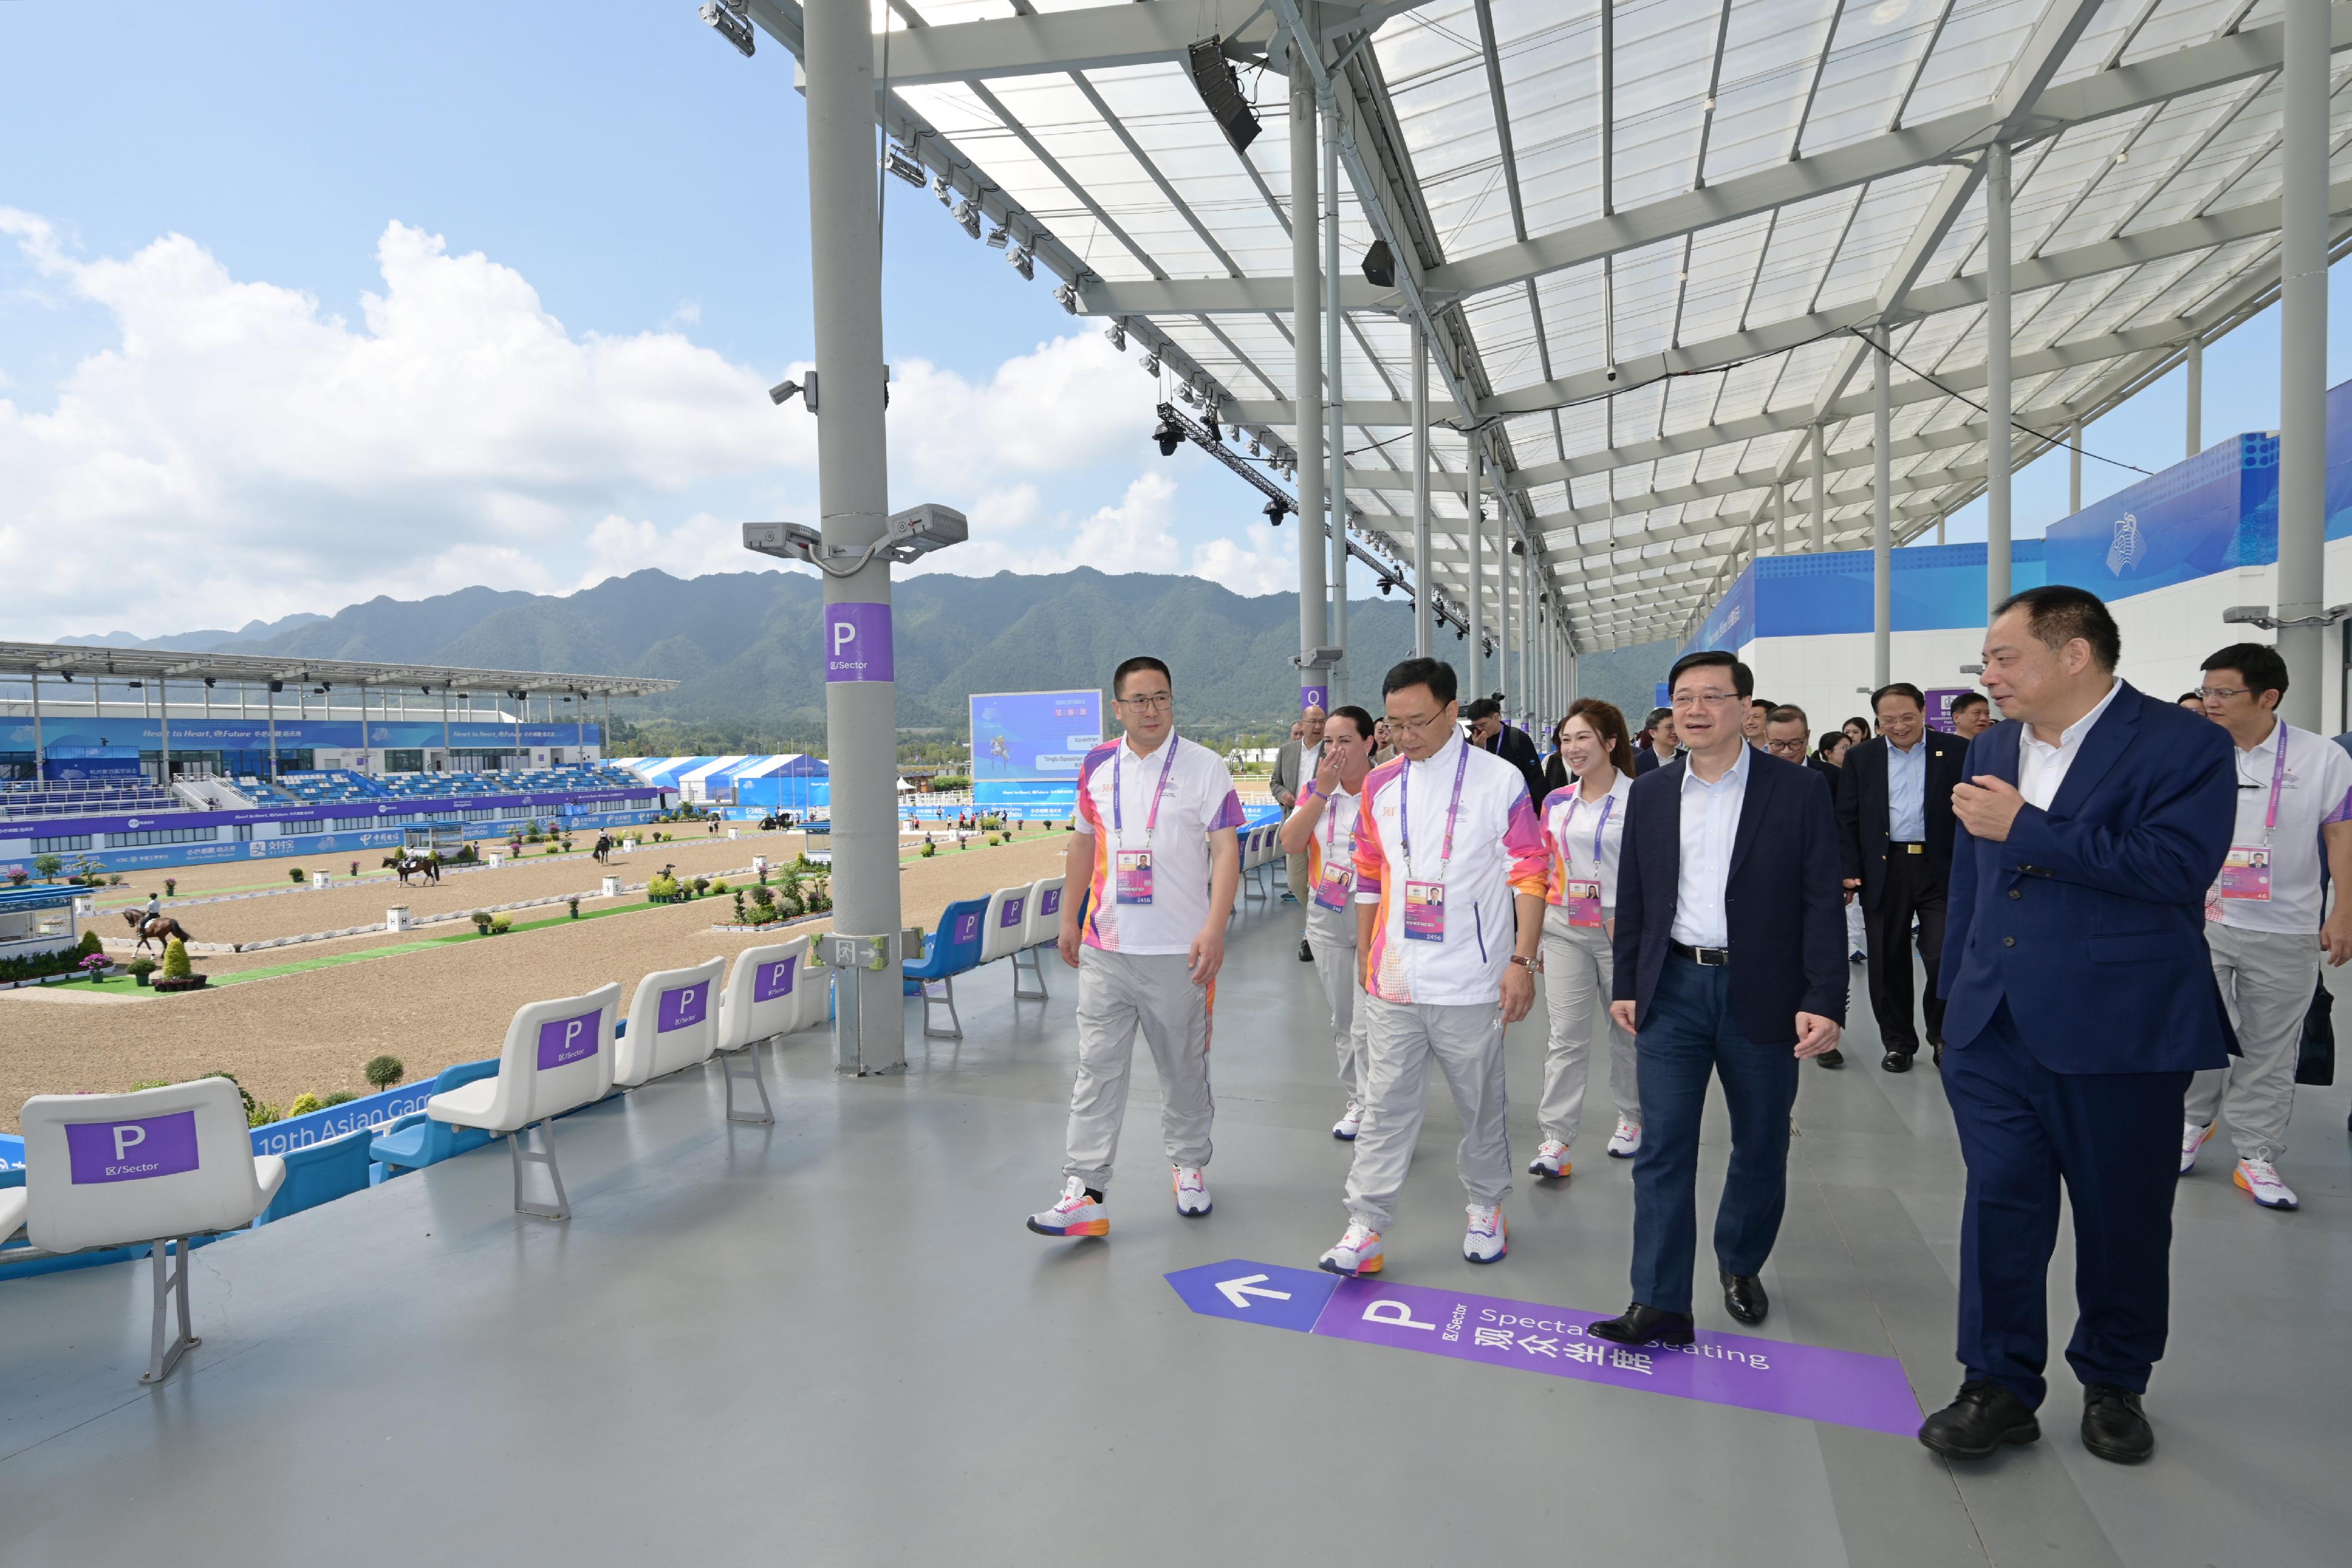 The Chief Executive, Mr John Lee, led a Hong Kong Special Administrative Region Government delegation to Hangzhou and continued his visit programme today (September 25). Photo shows Mr Lee (front row, second right) visiting the Tonglu Equestrian Centre to learn more about its facilities and operation.
